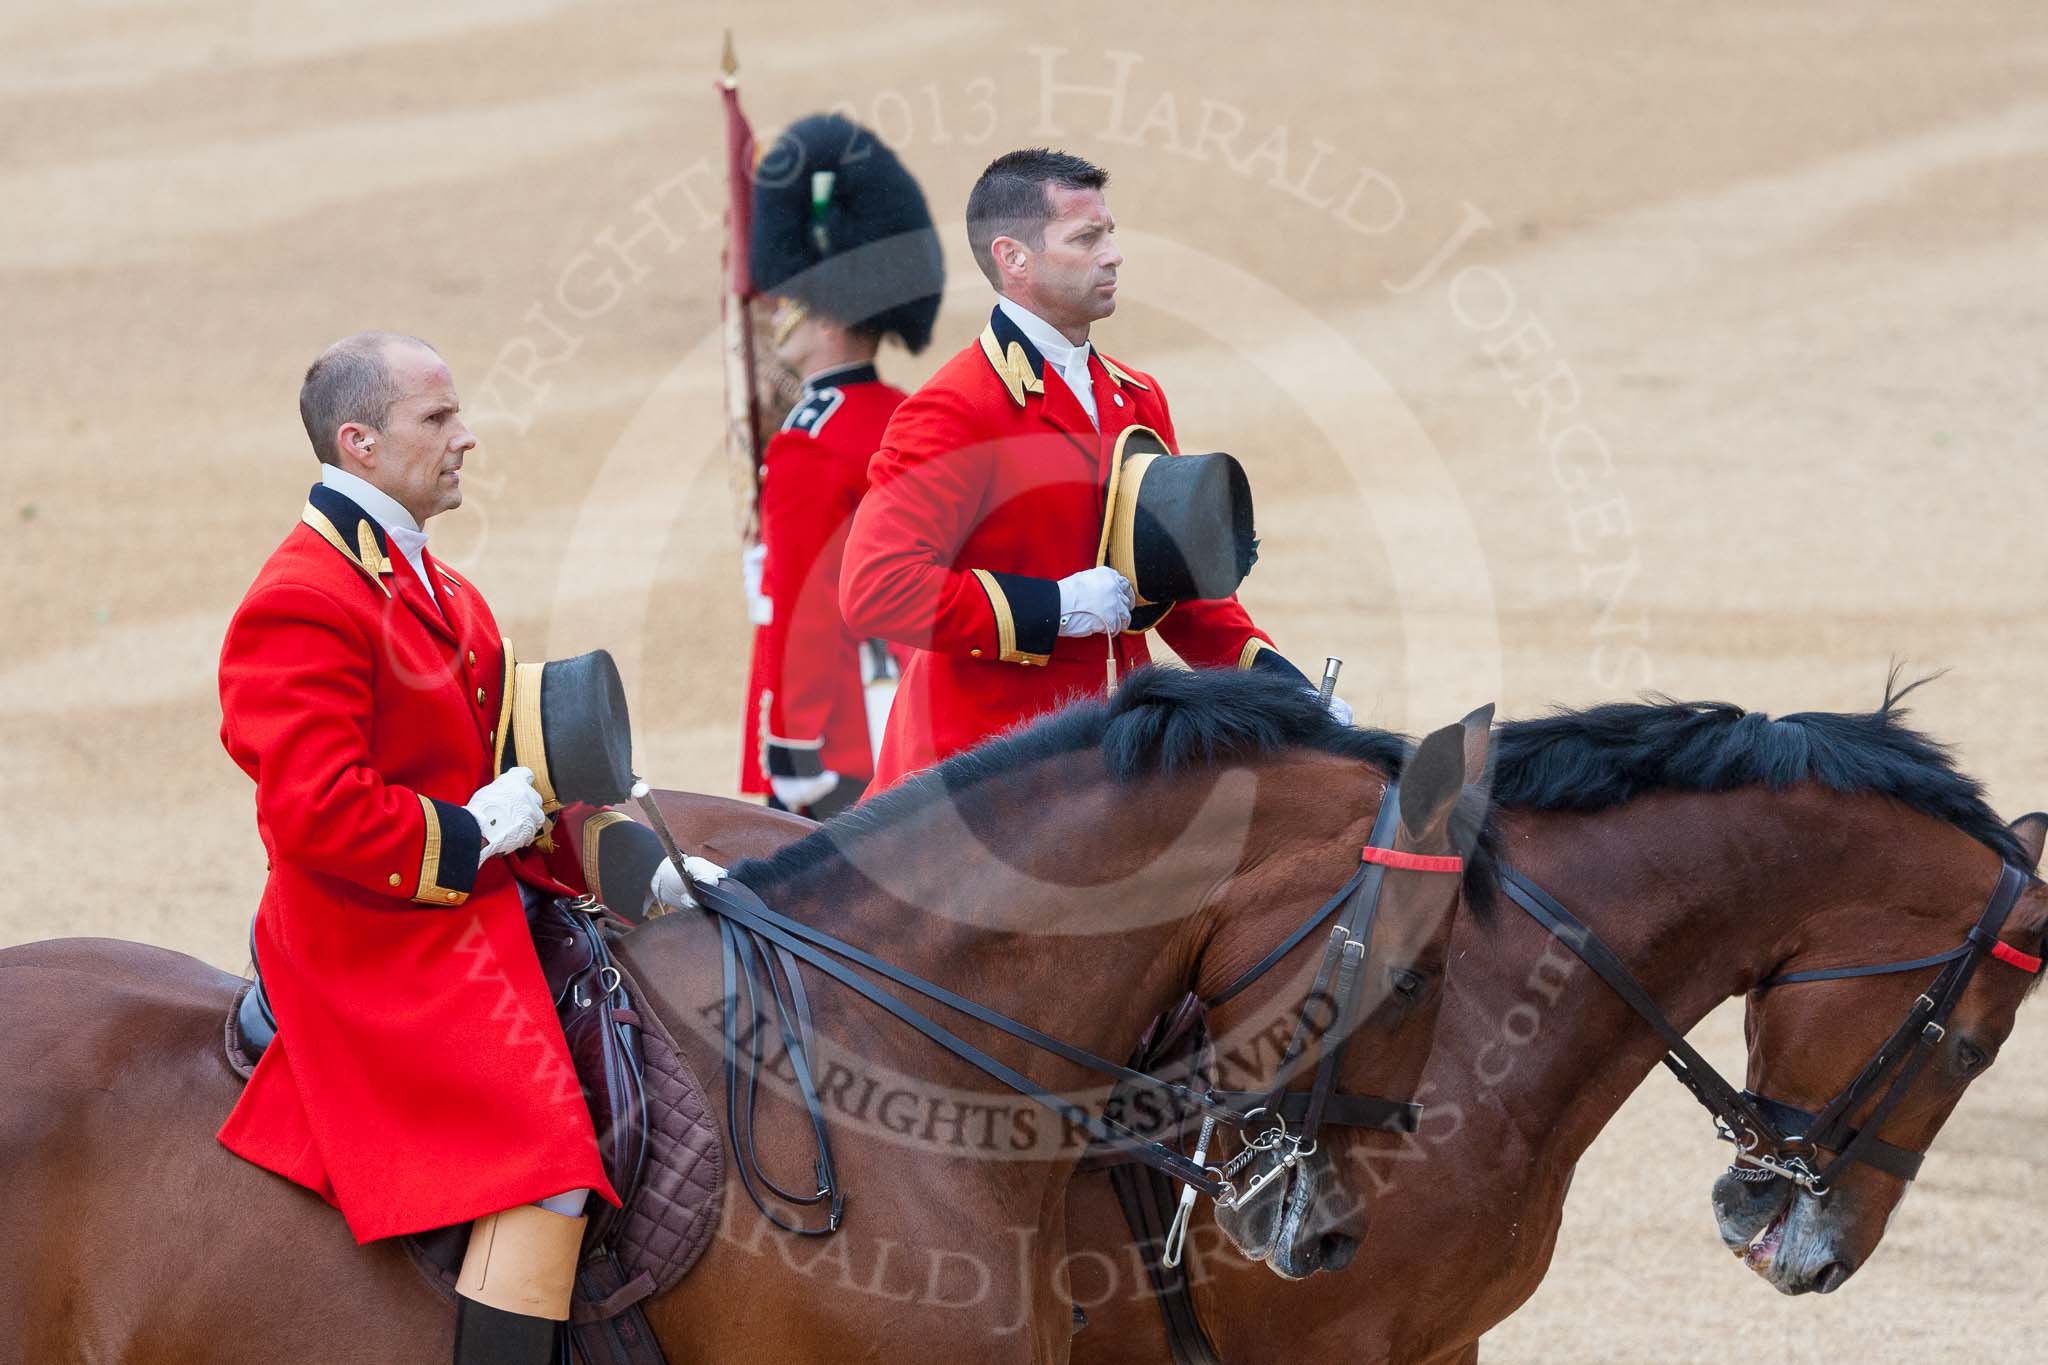 Trooping the Colour 2015. Image #199, 13 June 2015 10:52 Horse Guards Parade, London, UK